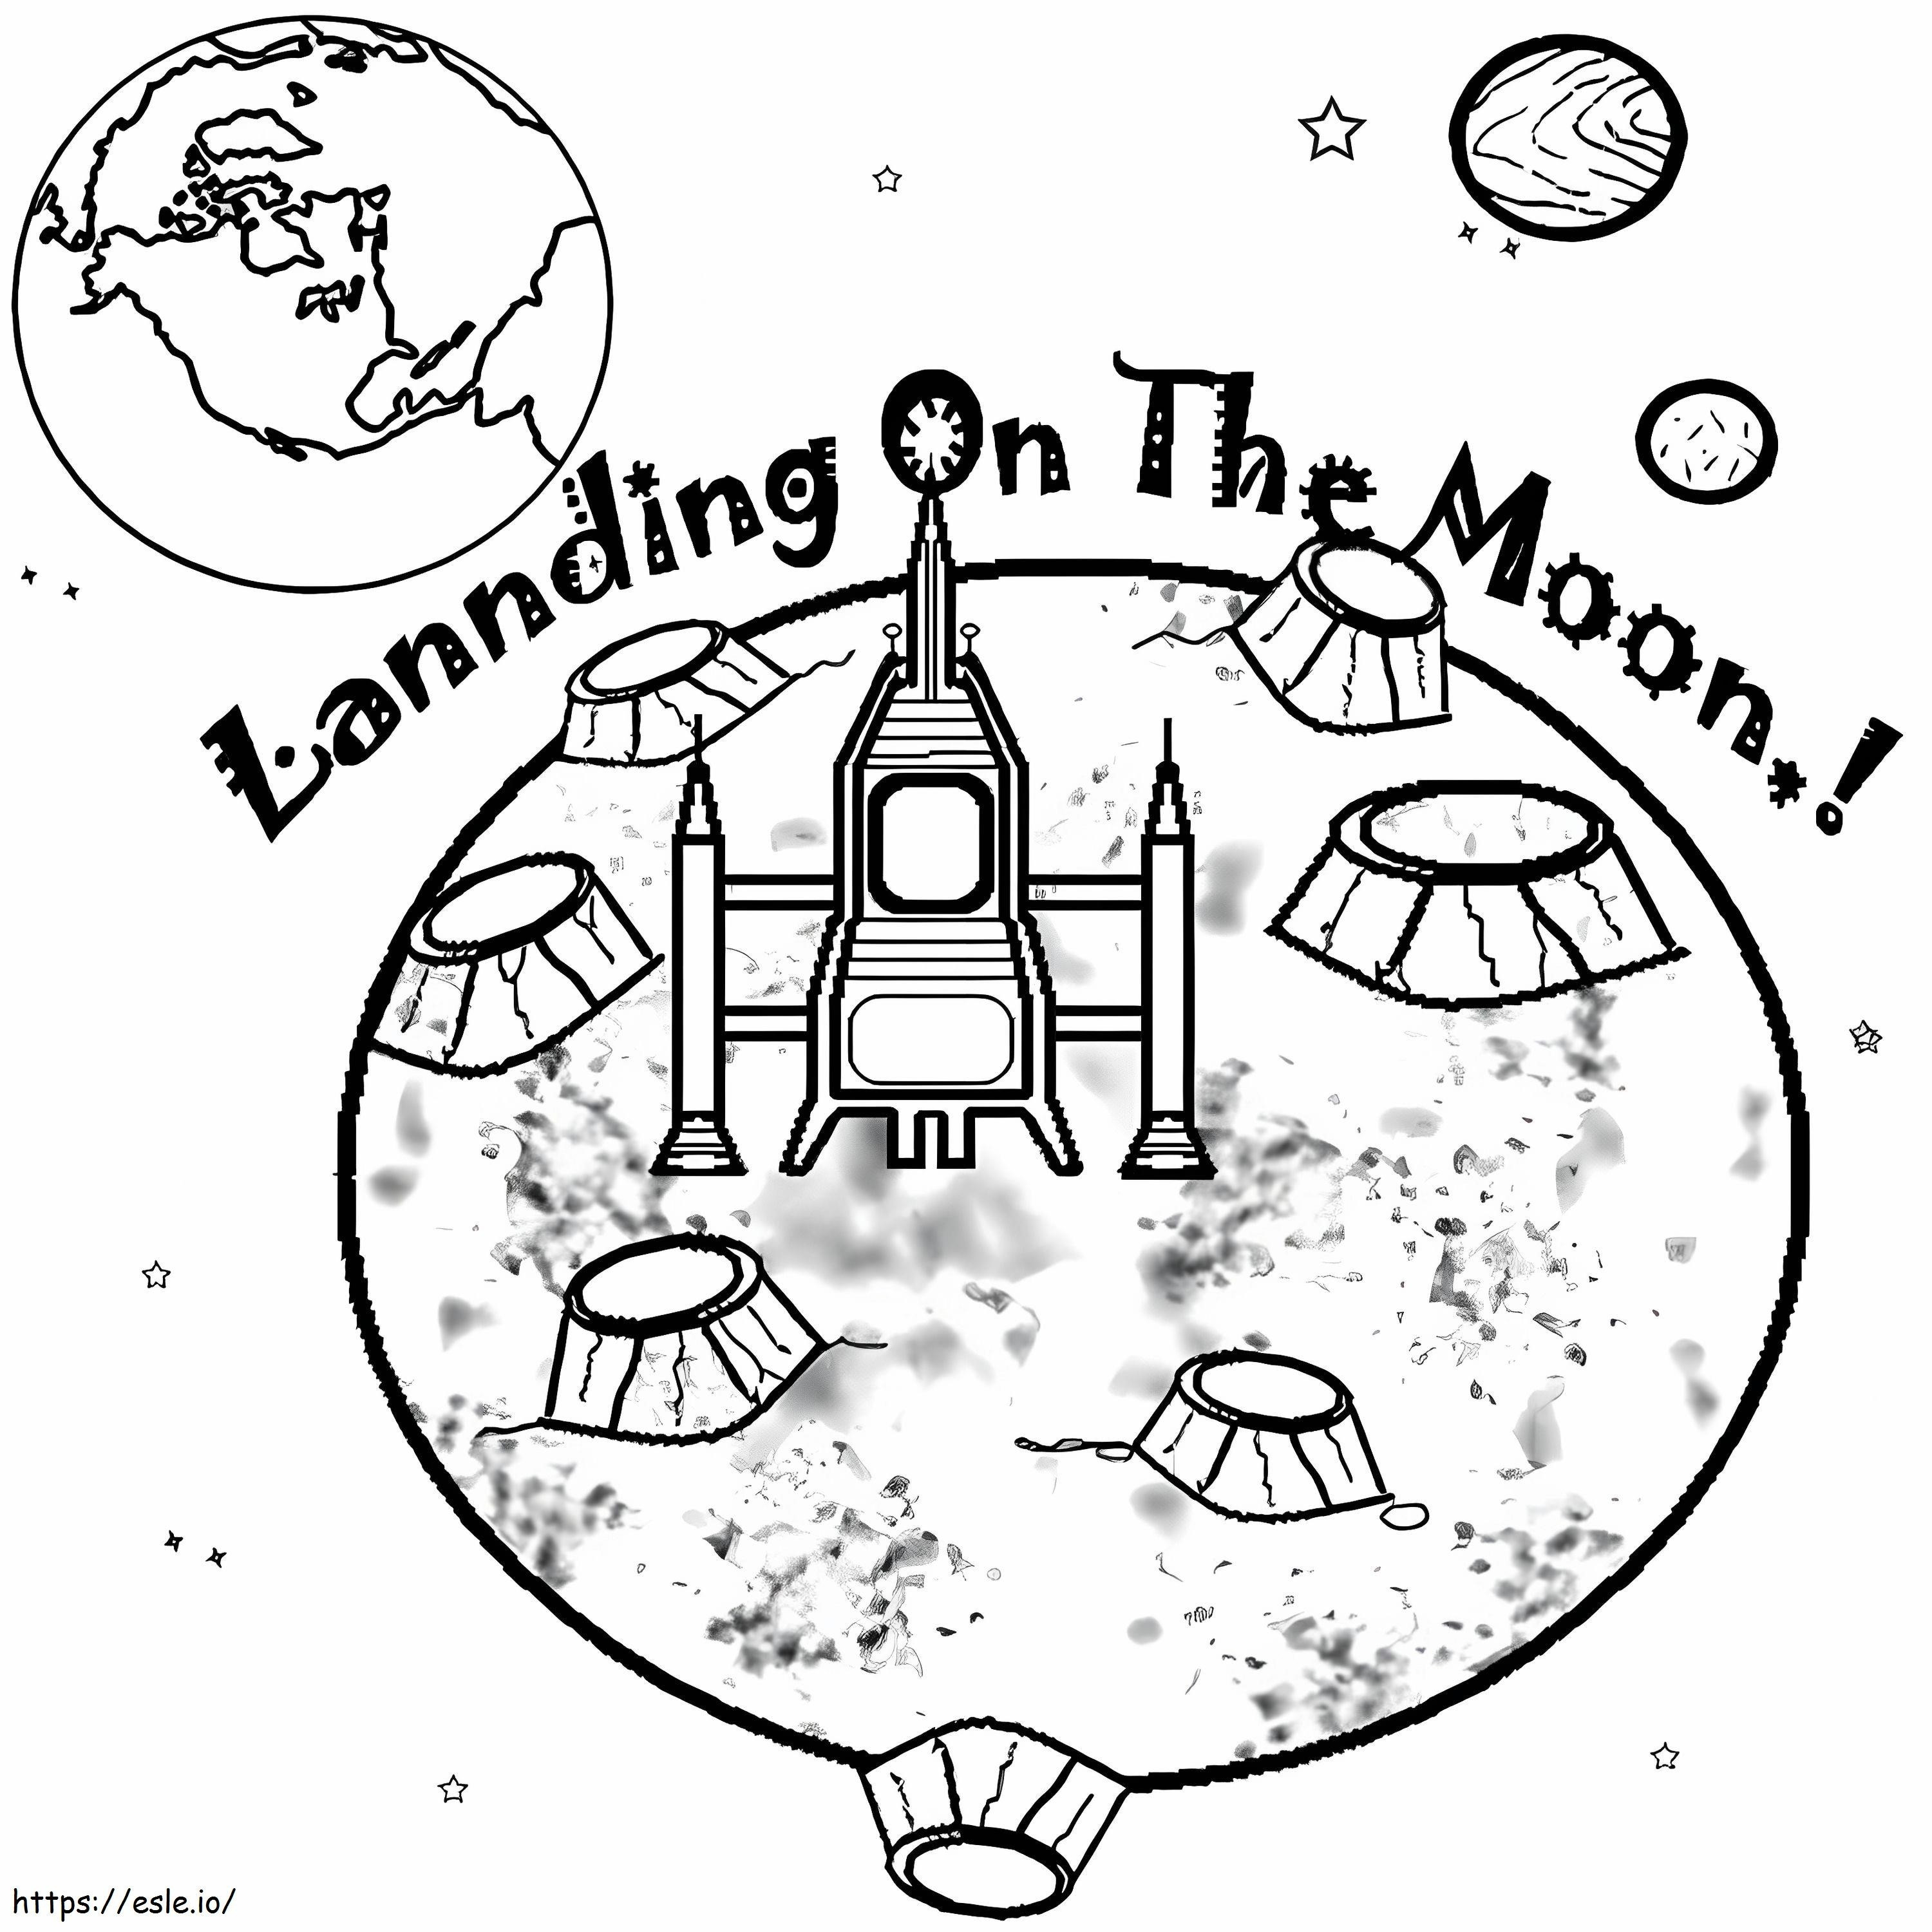 Landing On The Moon coloring page